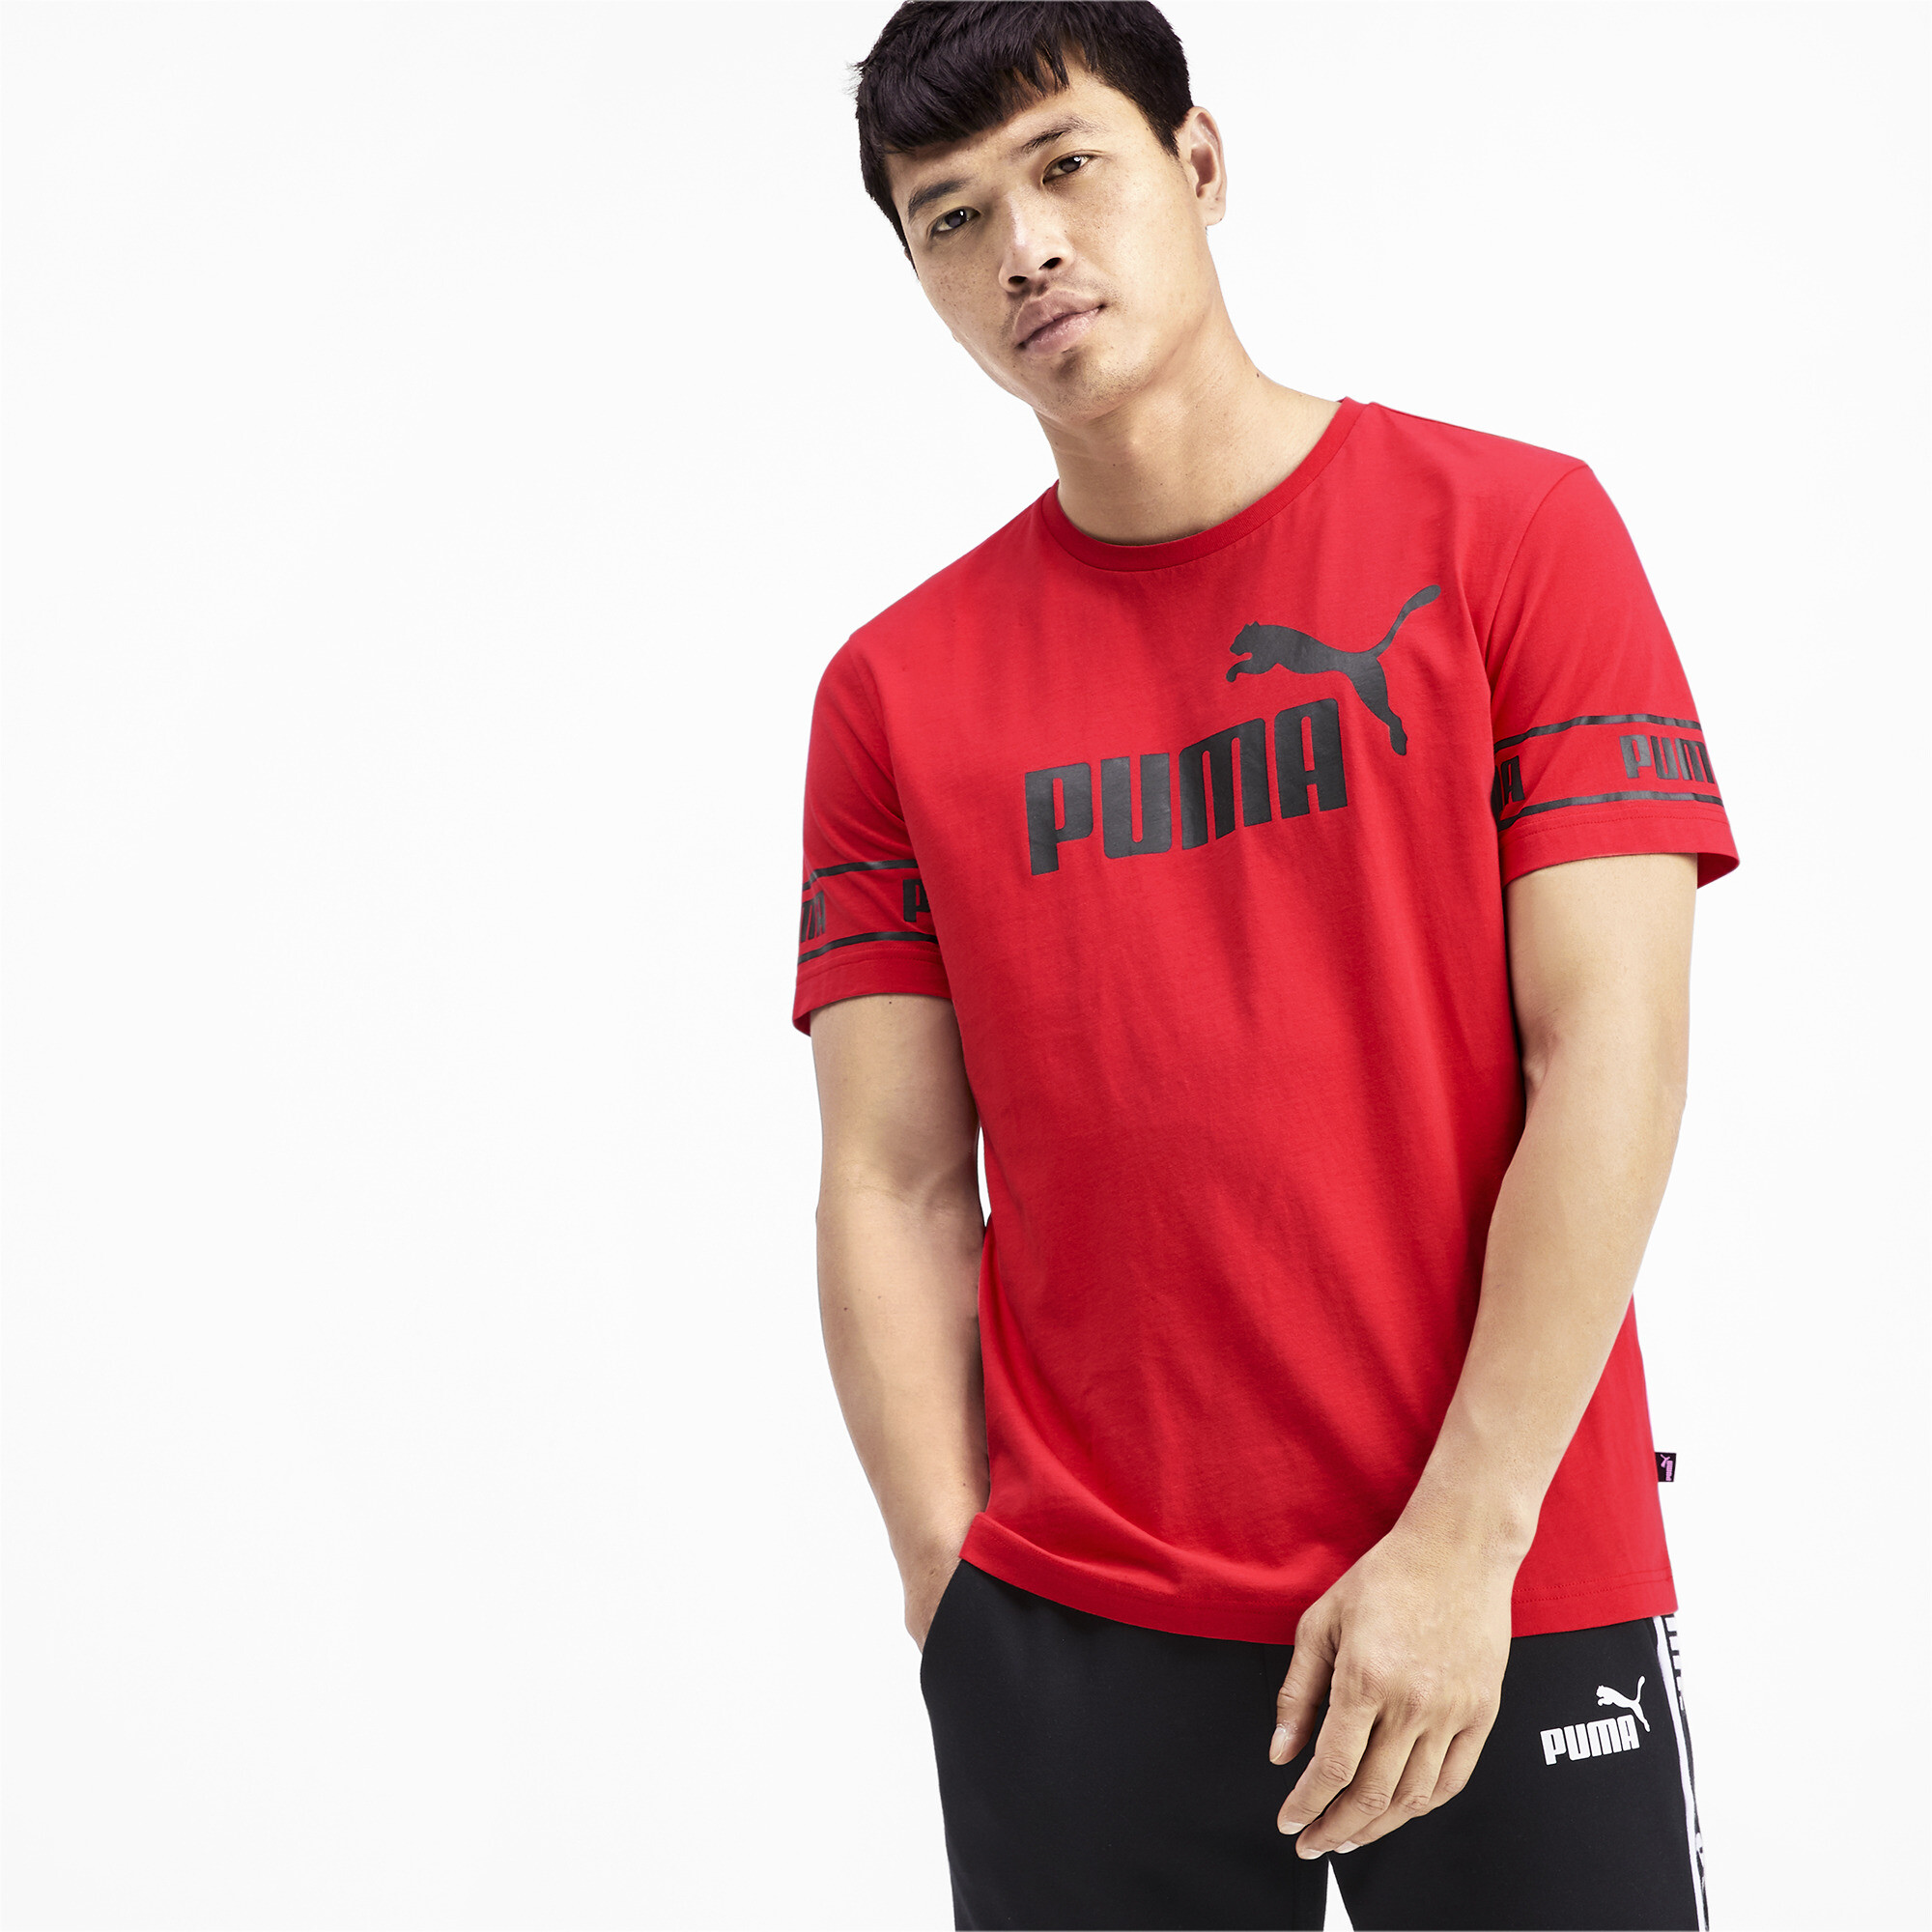 Men's Puma Amplified's T-Shirt, Red, Size -, Clothing